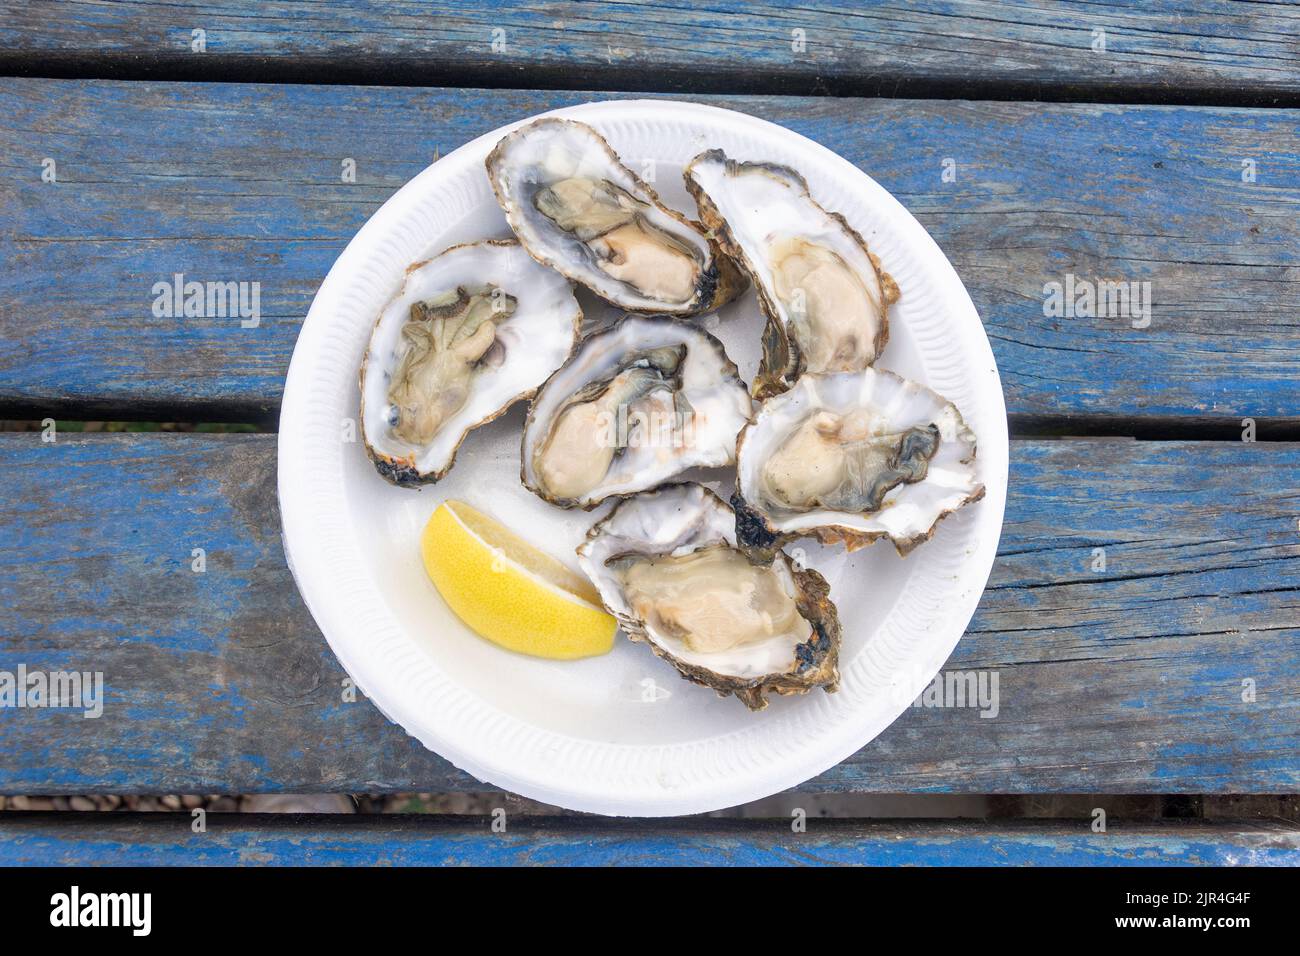 Plate of fresh oysters in their shells, West Mersea Oyster Bar, Coast Road, West Mersea, Essex, England, United Kingdom Stock Photo